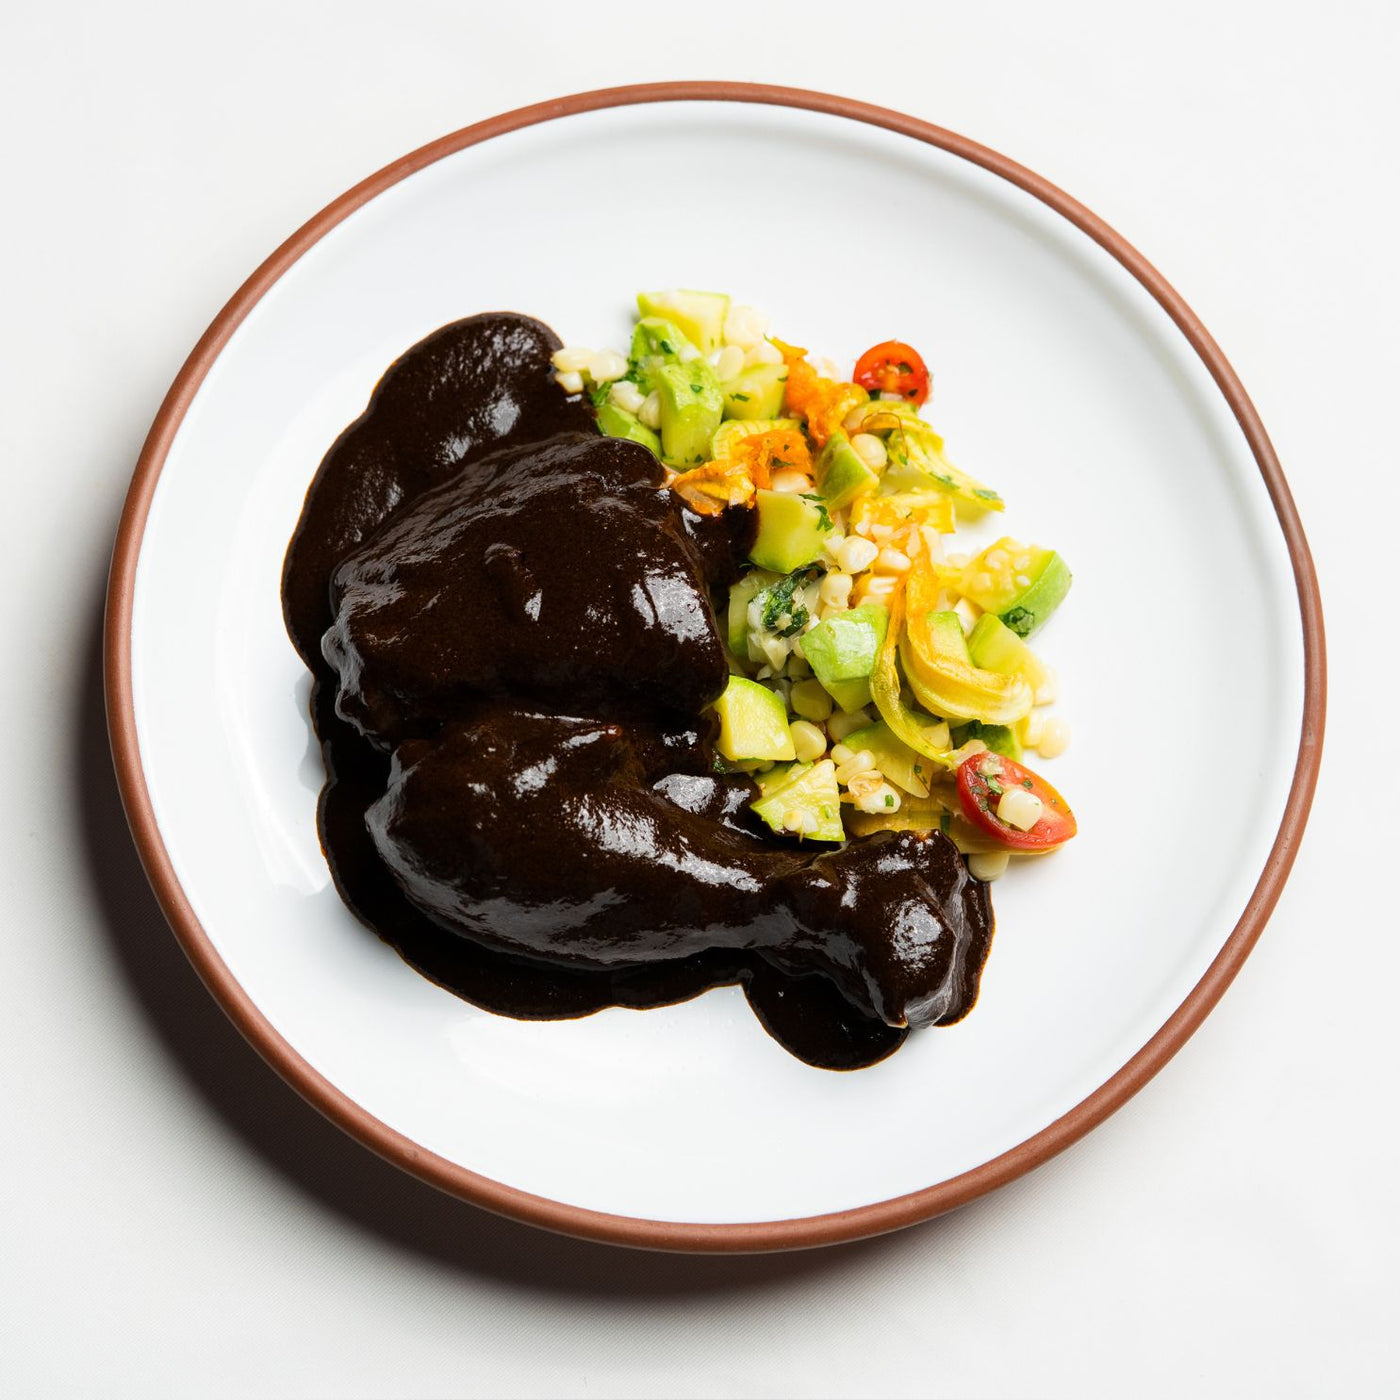 Mole Negro sauce over chicken with a fresh salad.